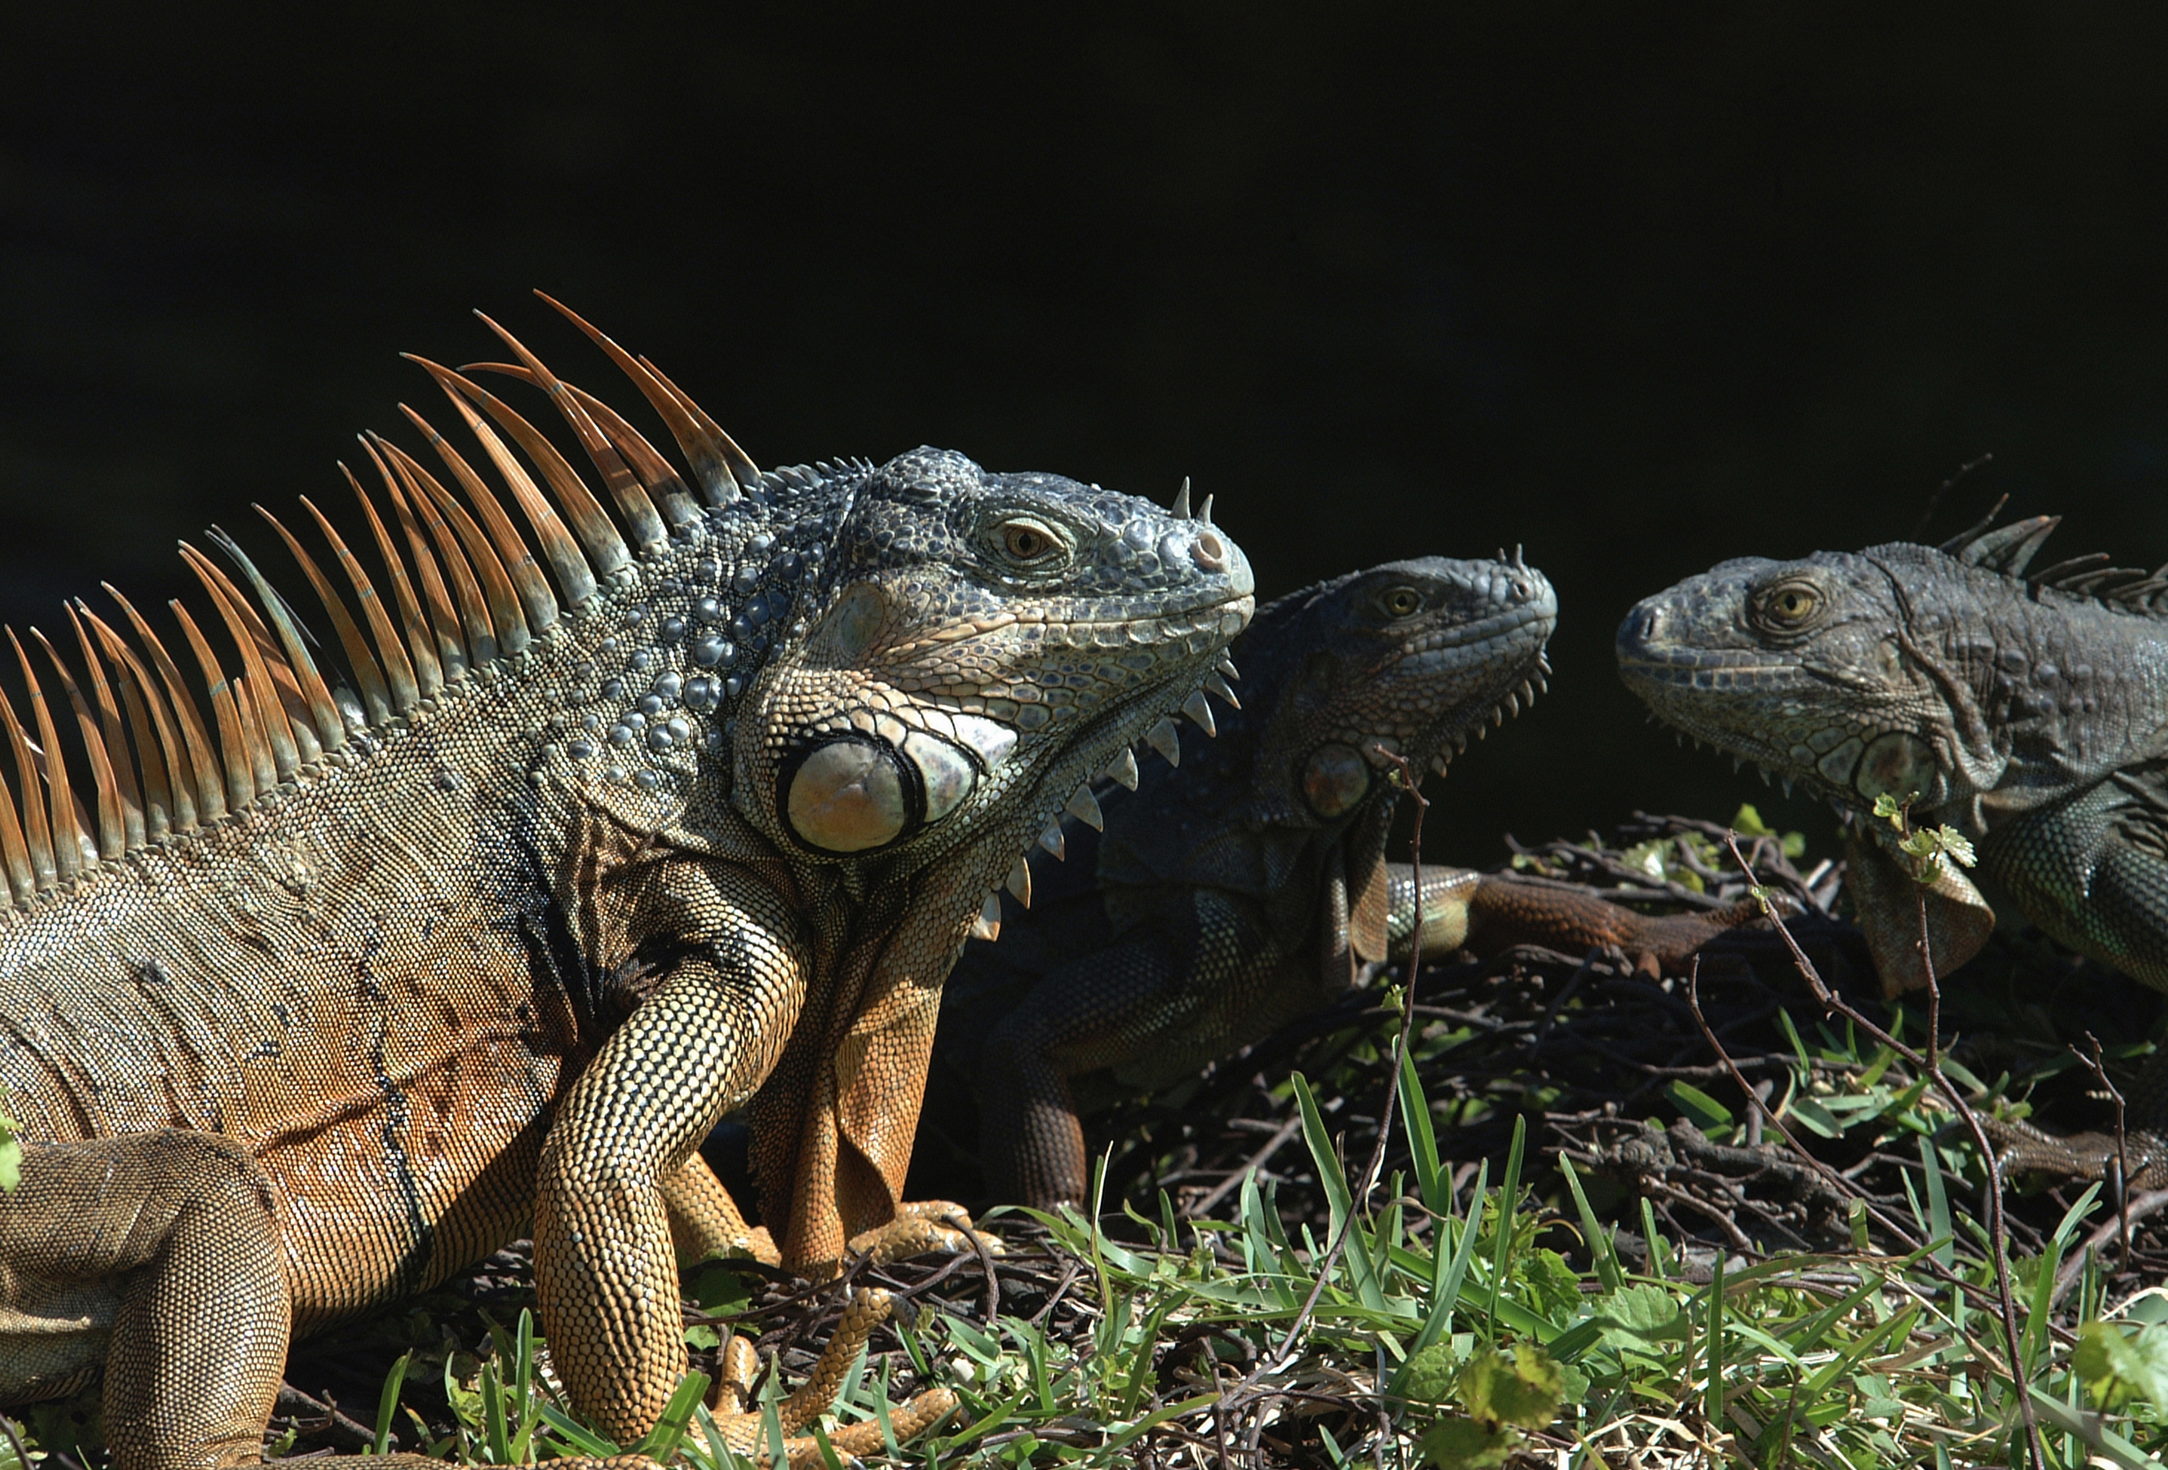 Adult green iguanas males and females, in Broward County near the University of Florida’s Fort Lauderdale Research and Education Center.